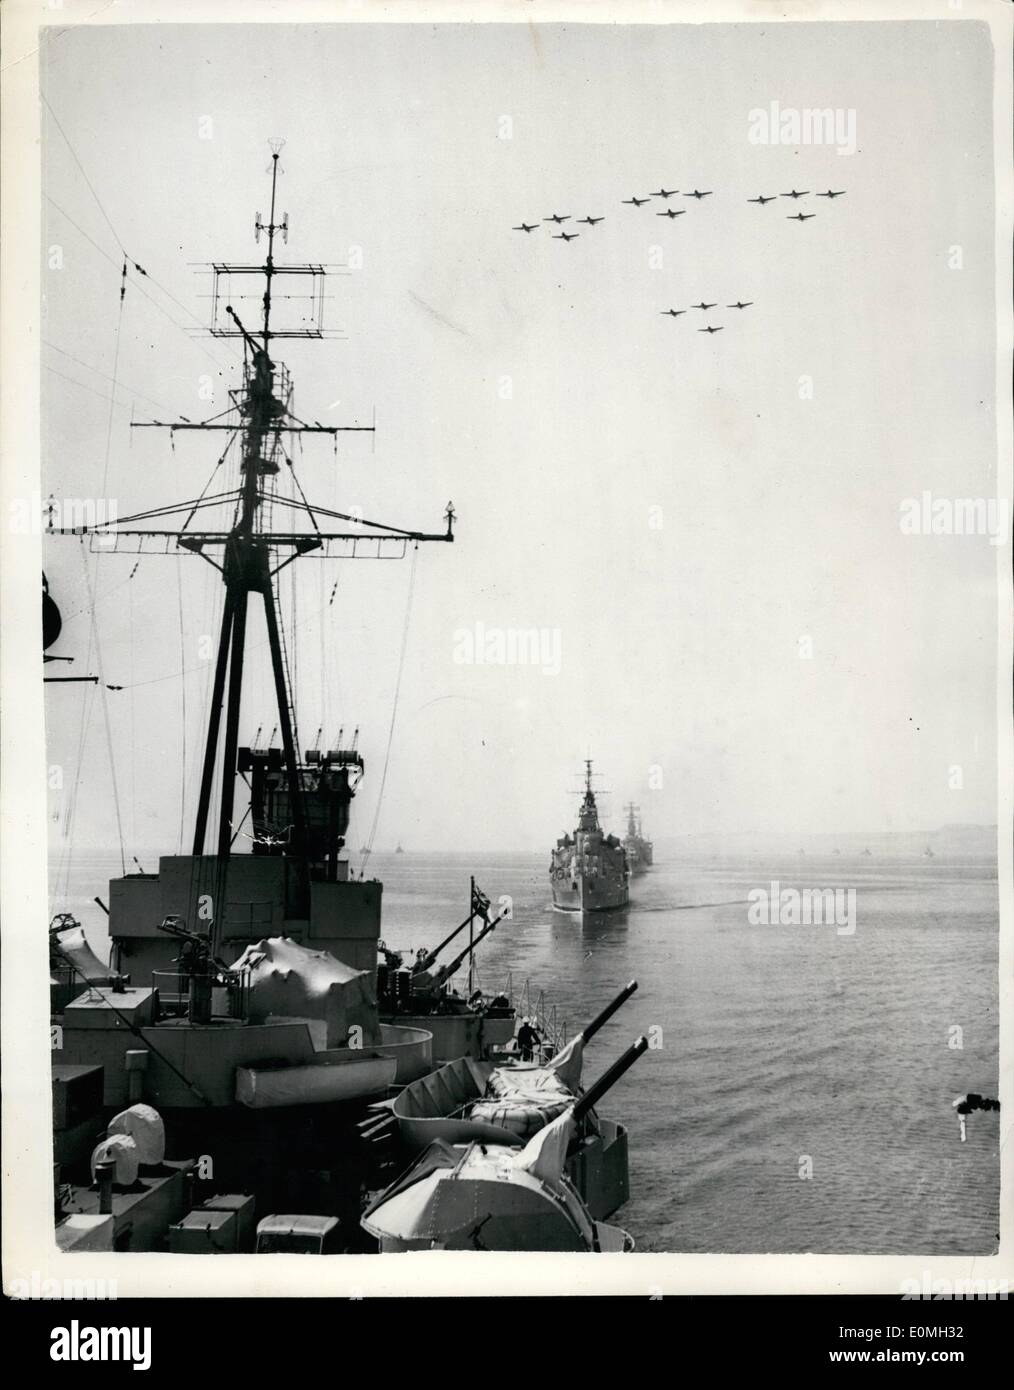 Jul. 07, 1955 - N.A.T.O. Ships Leave Forth On Exercise: Photo Shows Sixteen aircraft fly over the N.A.T.O. Ships as they sail out of the Firth of Forth, Scotland on Tuesday - for exercise. The picture, taken from H.M.S. Glasgow, shows H.M.S. Bermunds, followed by the Dutch cruiser De Ruyter - and flanked by destroyers. Stock Photo